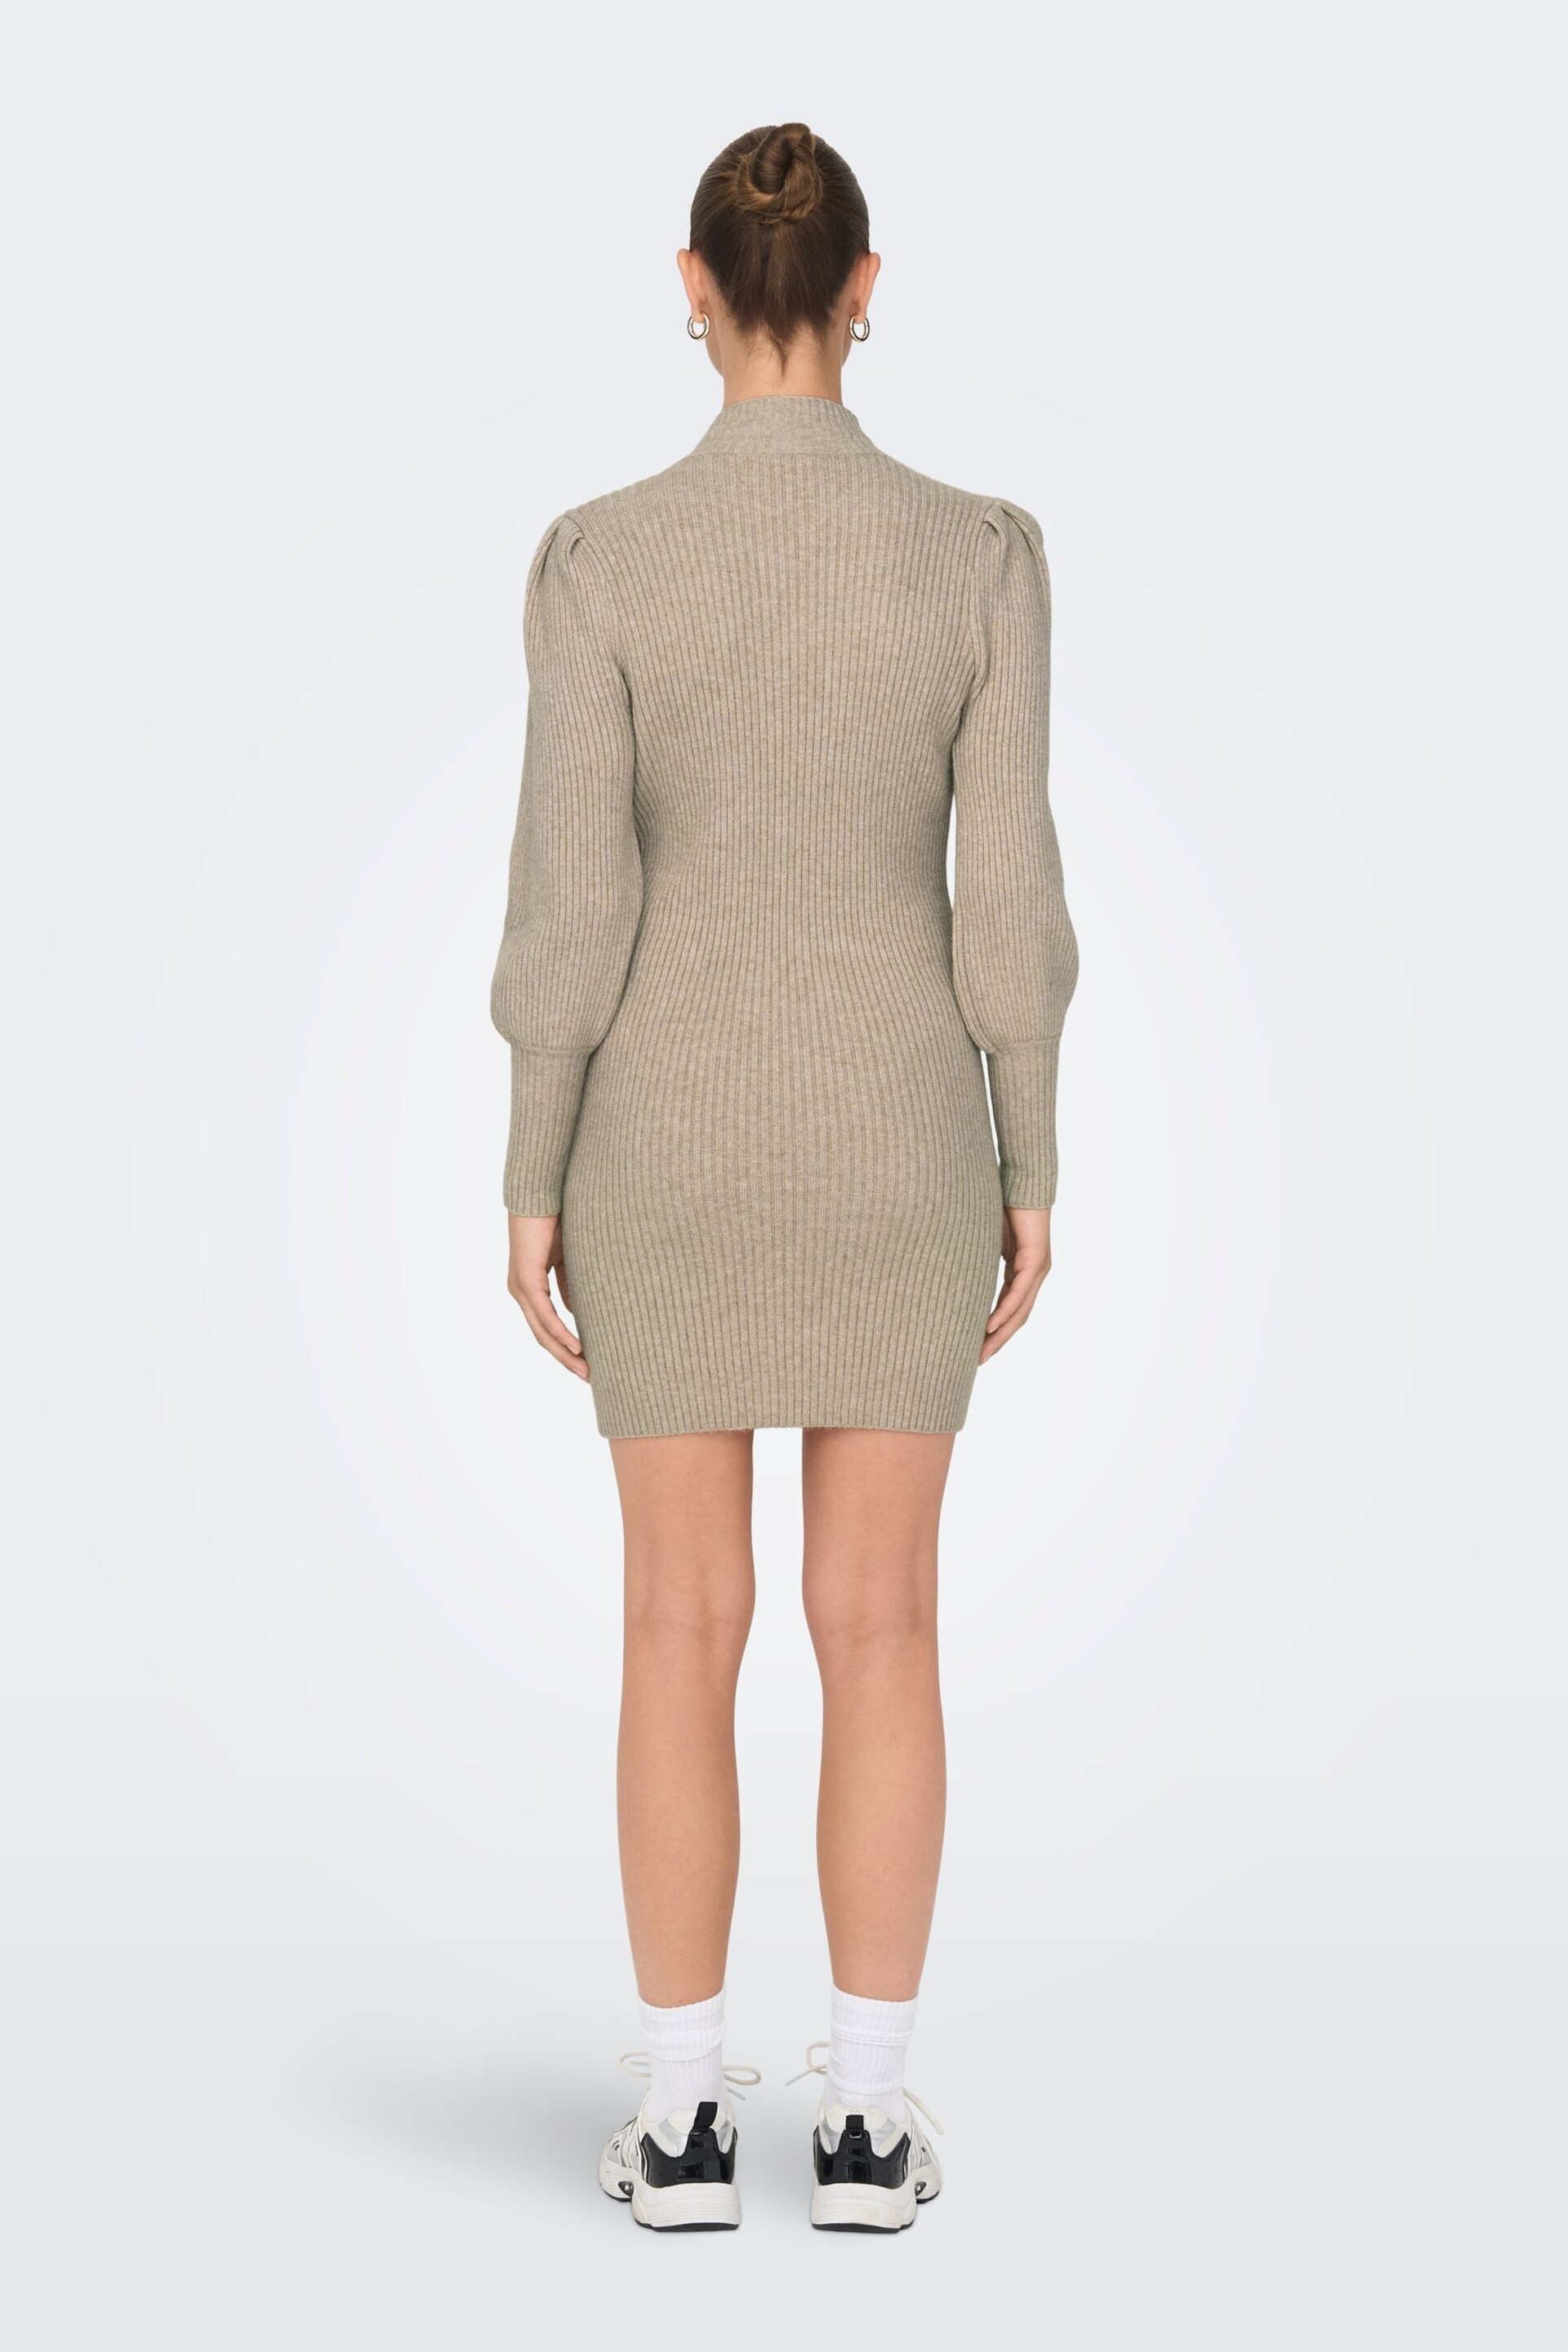 ONLY Brown Puff Sleeve Knitted Jumper Dress - Image 2 of 5